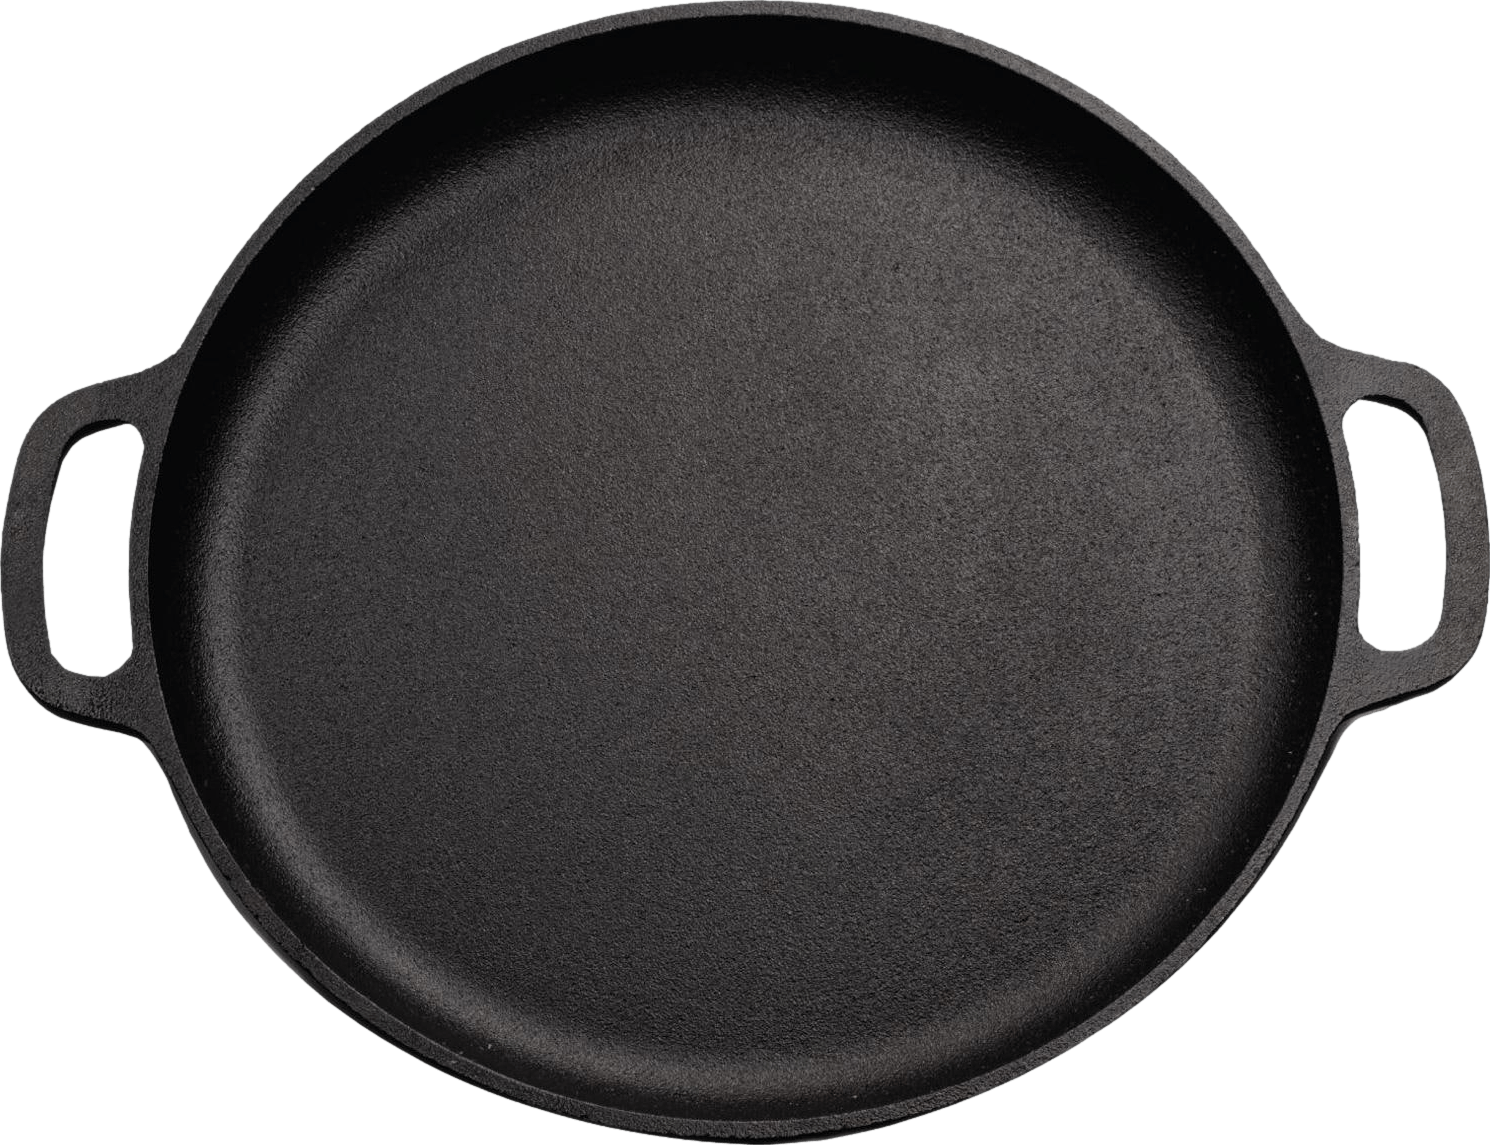 Napoleon Cast Iron Skillet With Removable Handle : BBQGuys